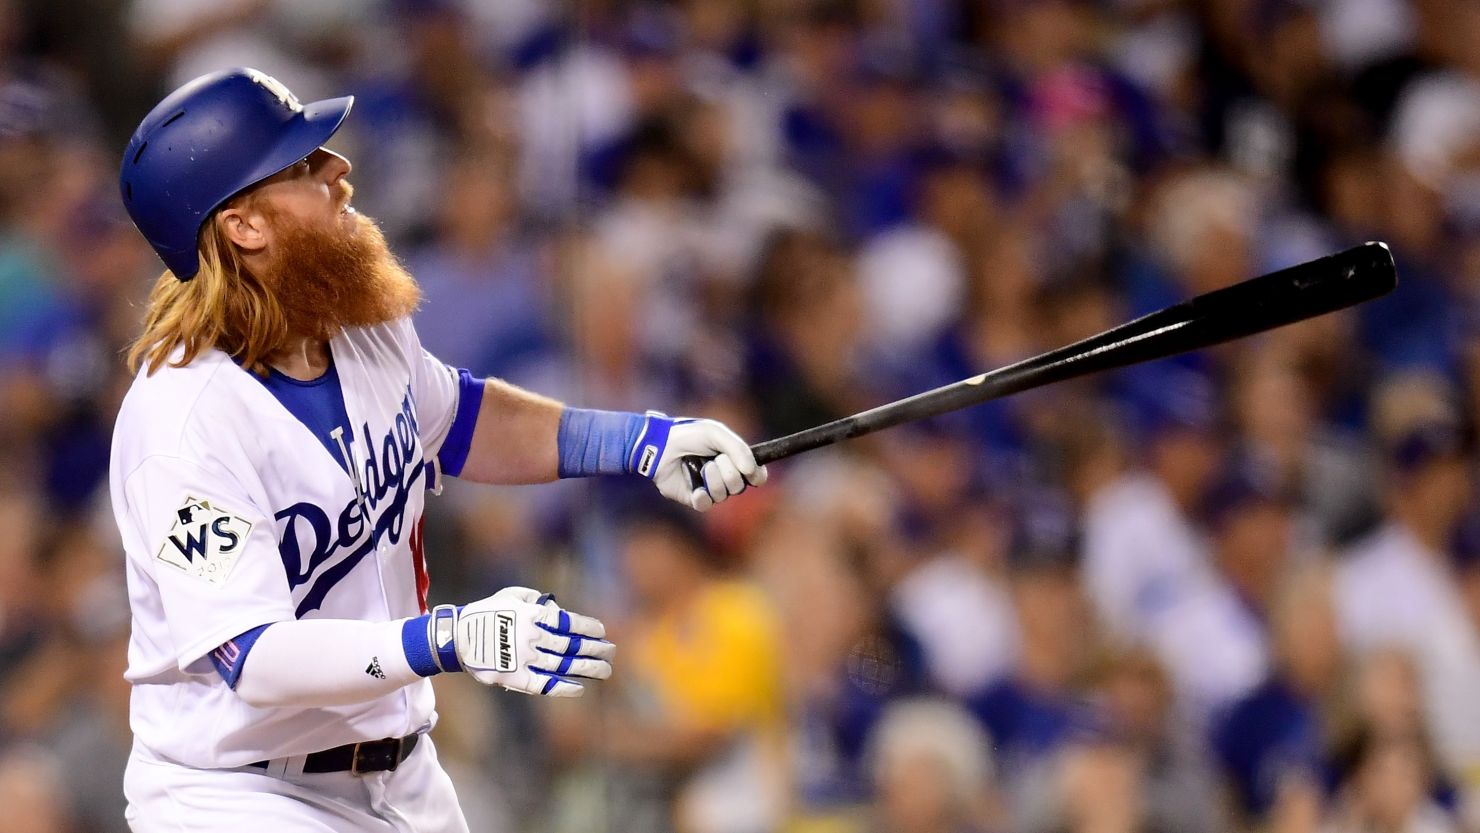 Justin Turner of the Los Angeles Dodgers reacts after hitting a two-run home run during the sixth inning in Game 1 of the 2017 World Series.